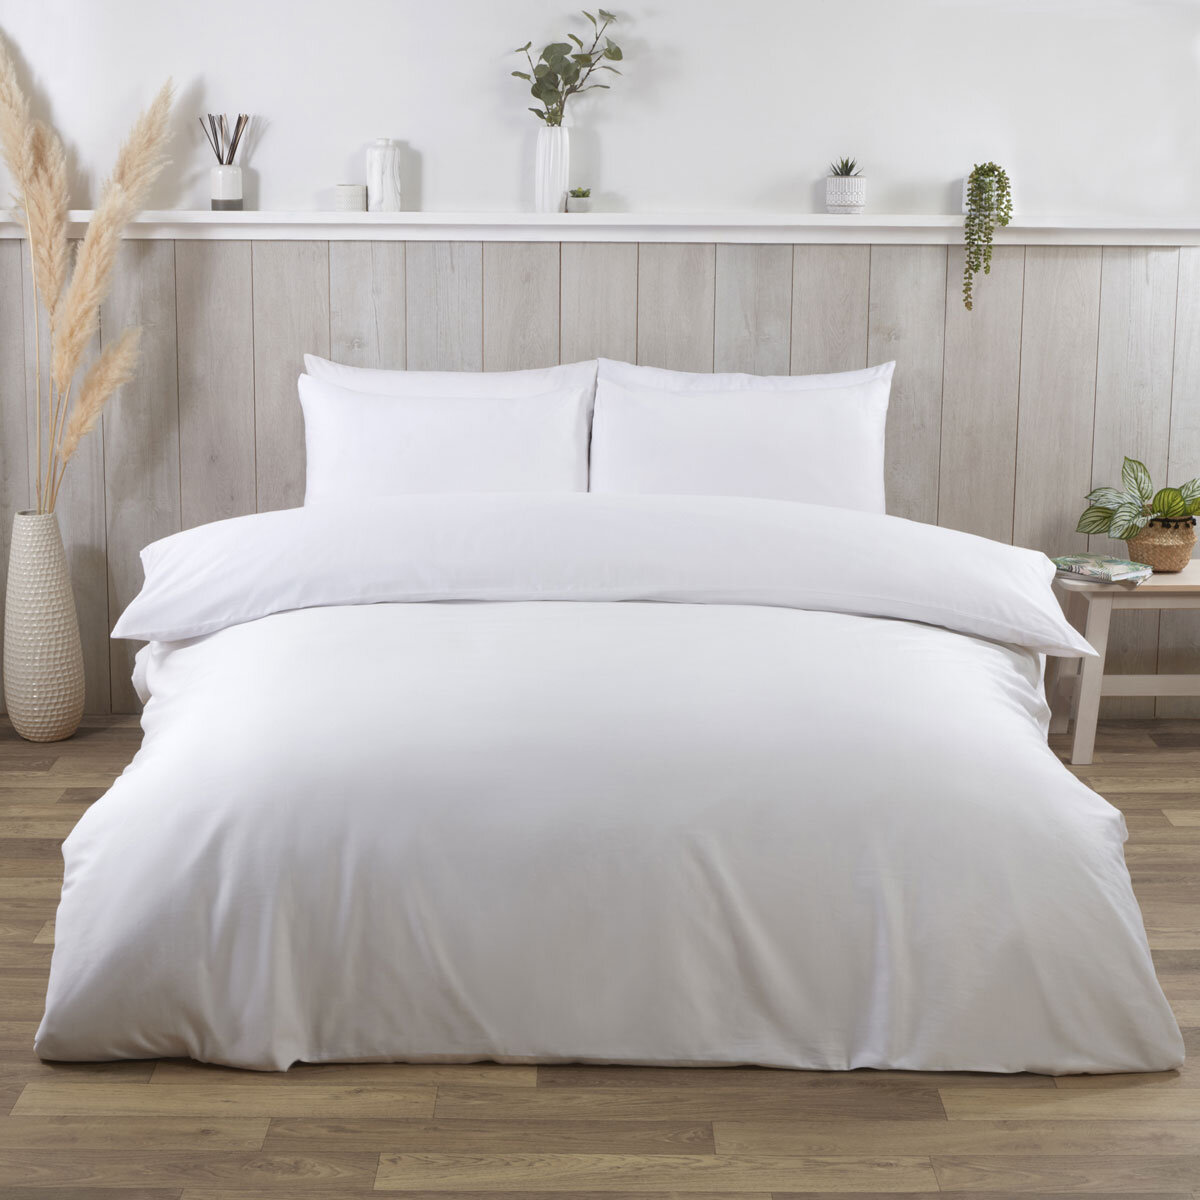 British Home Bedding 100% Egyptian Cotton Long Staple Sateen 400 Thread Count Fitted Sheet White, Single 